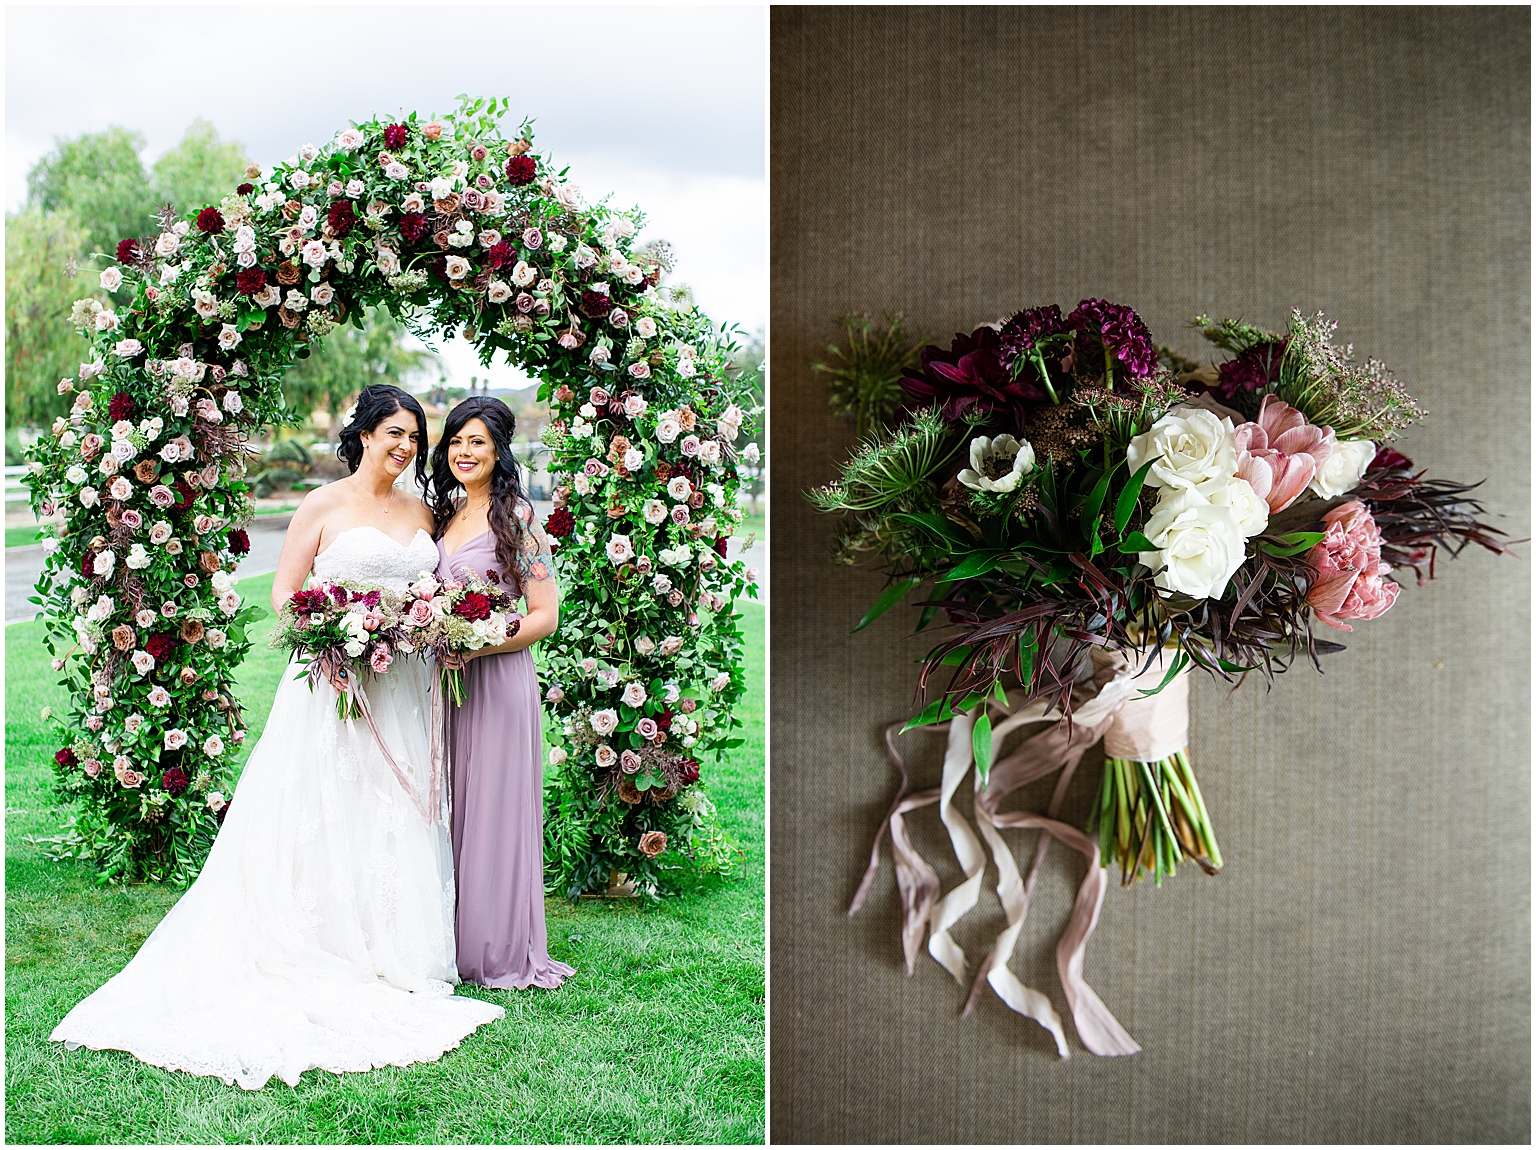 Bride and Bridesmaid under a beautiful floral arch, and a stunning flower bouquet by Little Hill Designs